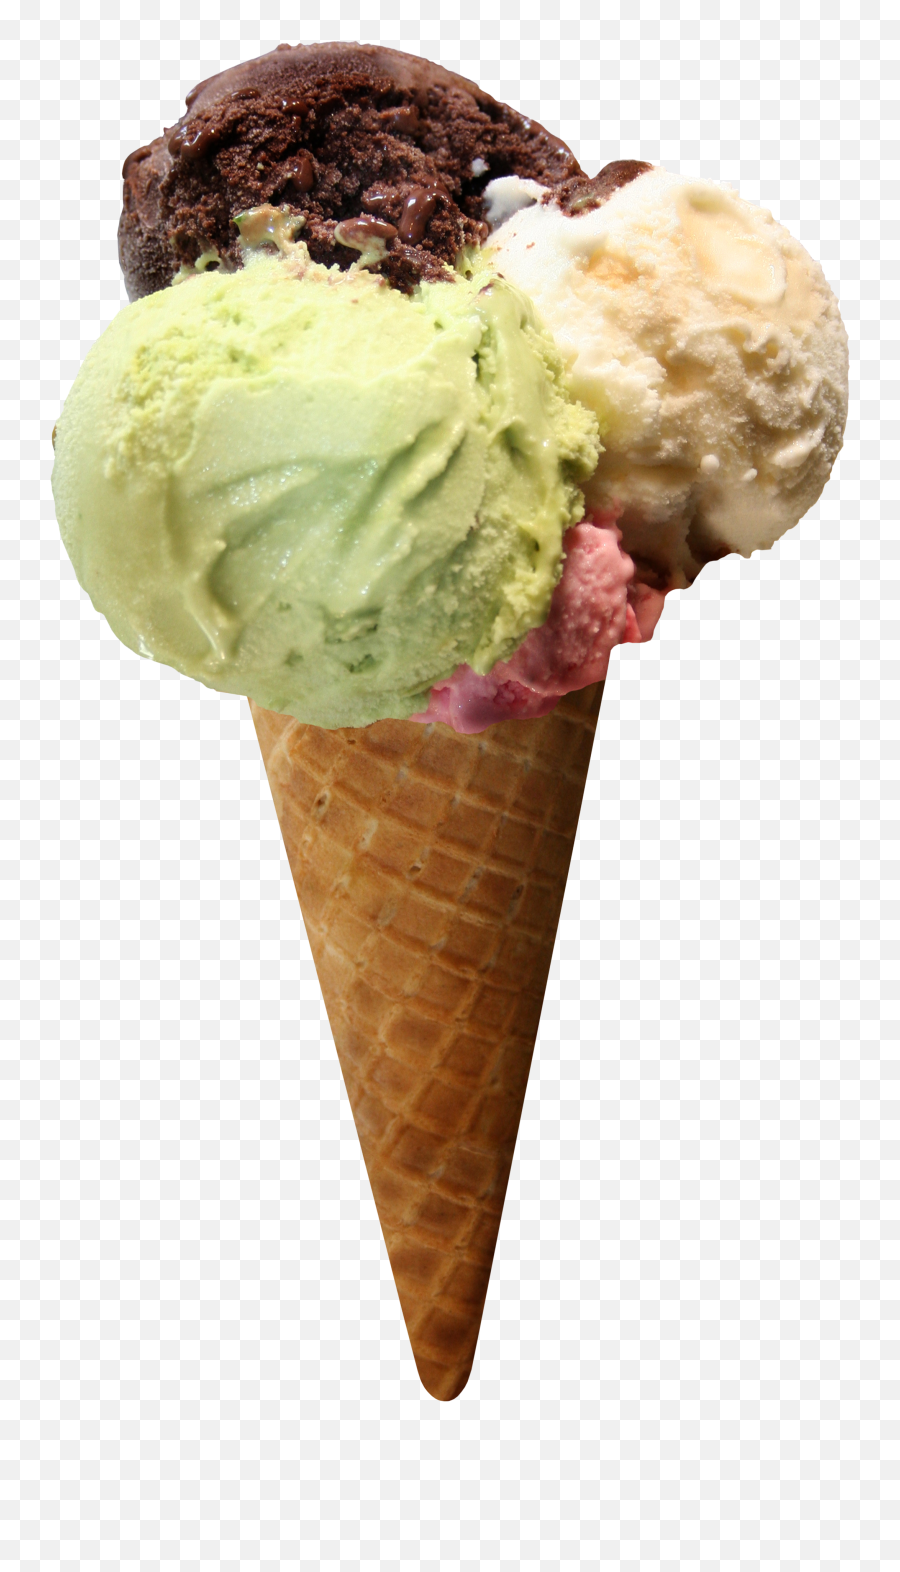 Ice Cream Png Image Free Ice Cream Png Pictures Download Emoji,Shirts With Cuteice Cream Emojis On Them